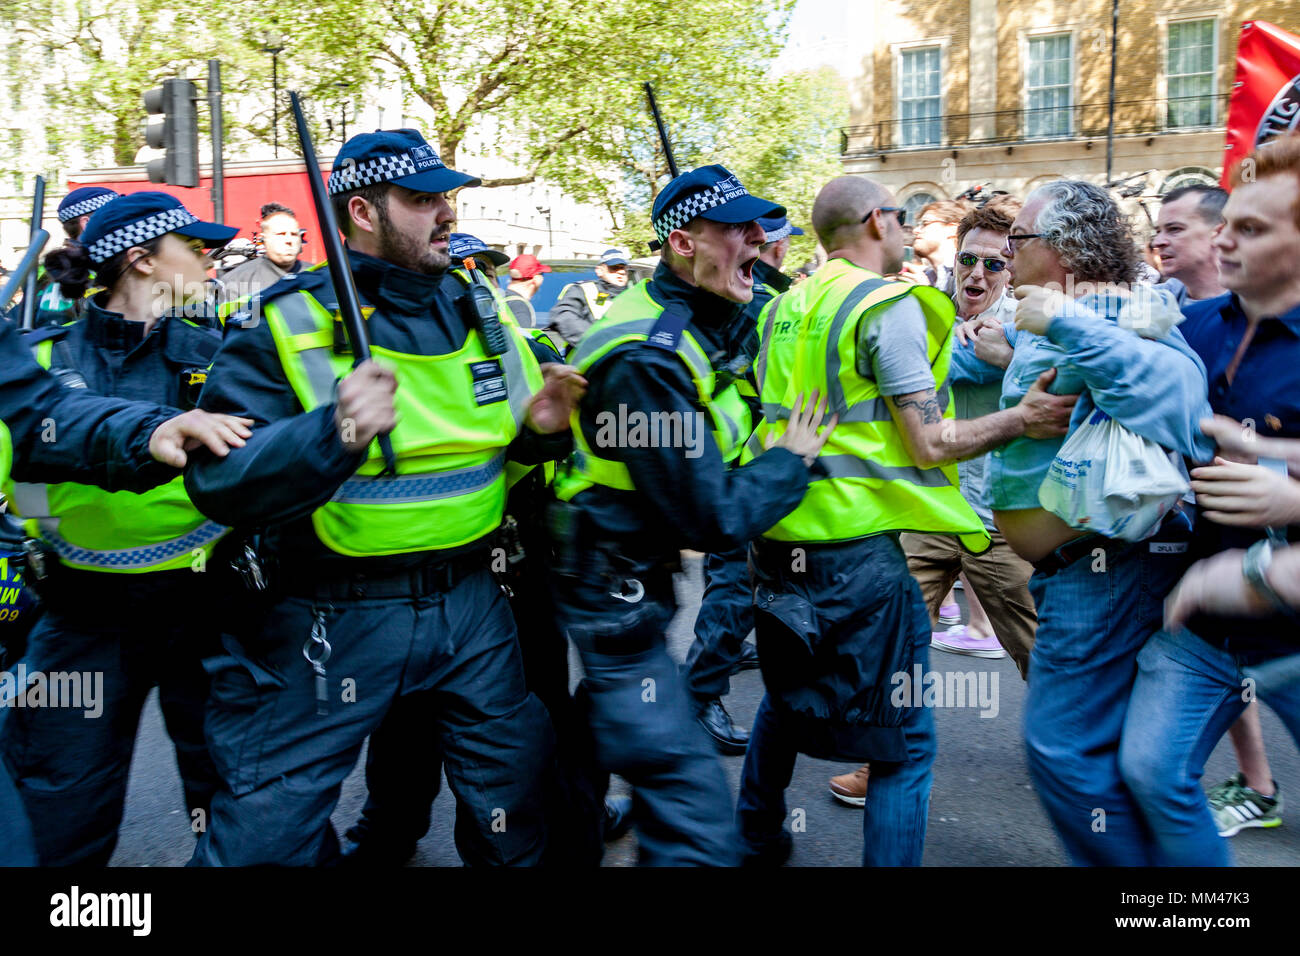 UK Police confront demonstrators at a freedom of speech rally organised by the right wing activist Tommy Robinson, London, UK Stock Photo